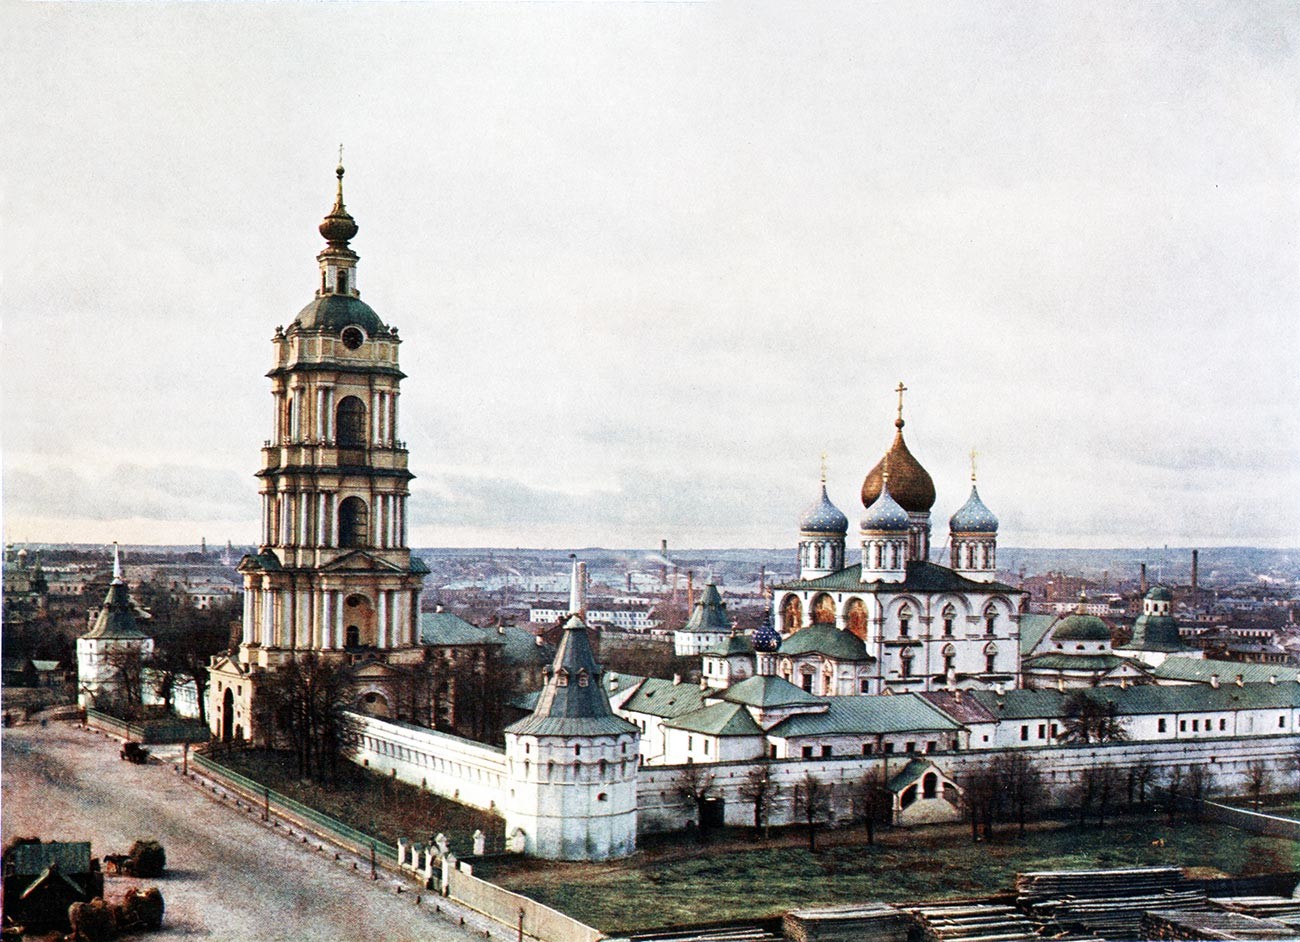 Novospassky Monastery, northeast view. From left: Southeast tower, bell tower, northeast tower, Church of St.Nicholas&east cloisters, Transfiguration Cathedral, Znamenye Church,1912. Color print published in P.G.Vasenko, Romanov Boyars and the Enthronement of Mikhail Fedorovich (St.Petersburg, 1913)